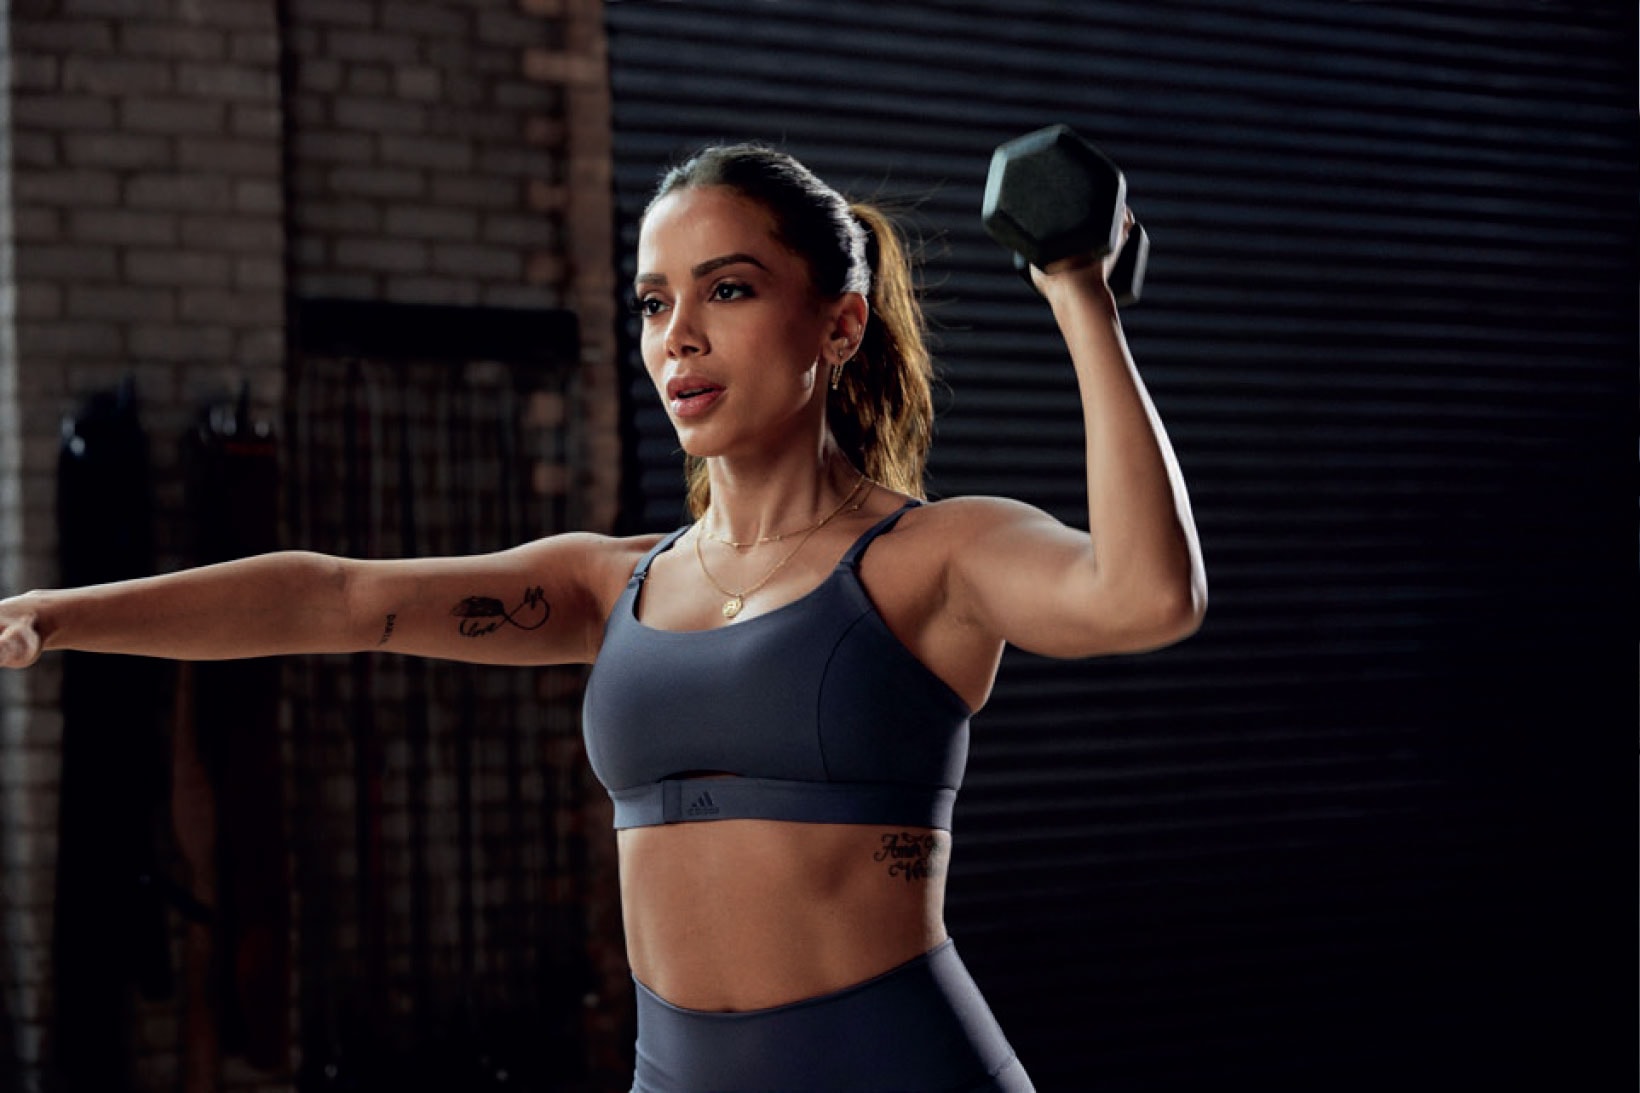 adidas Launches Inclusive Sports Bra Collection